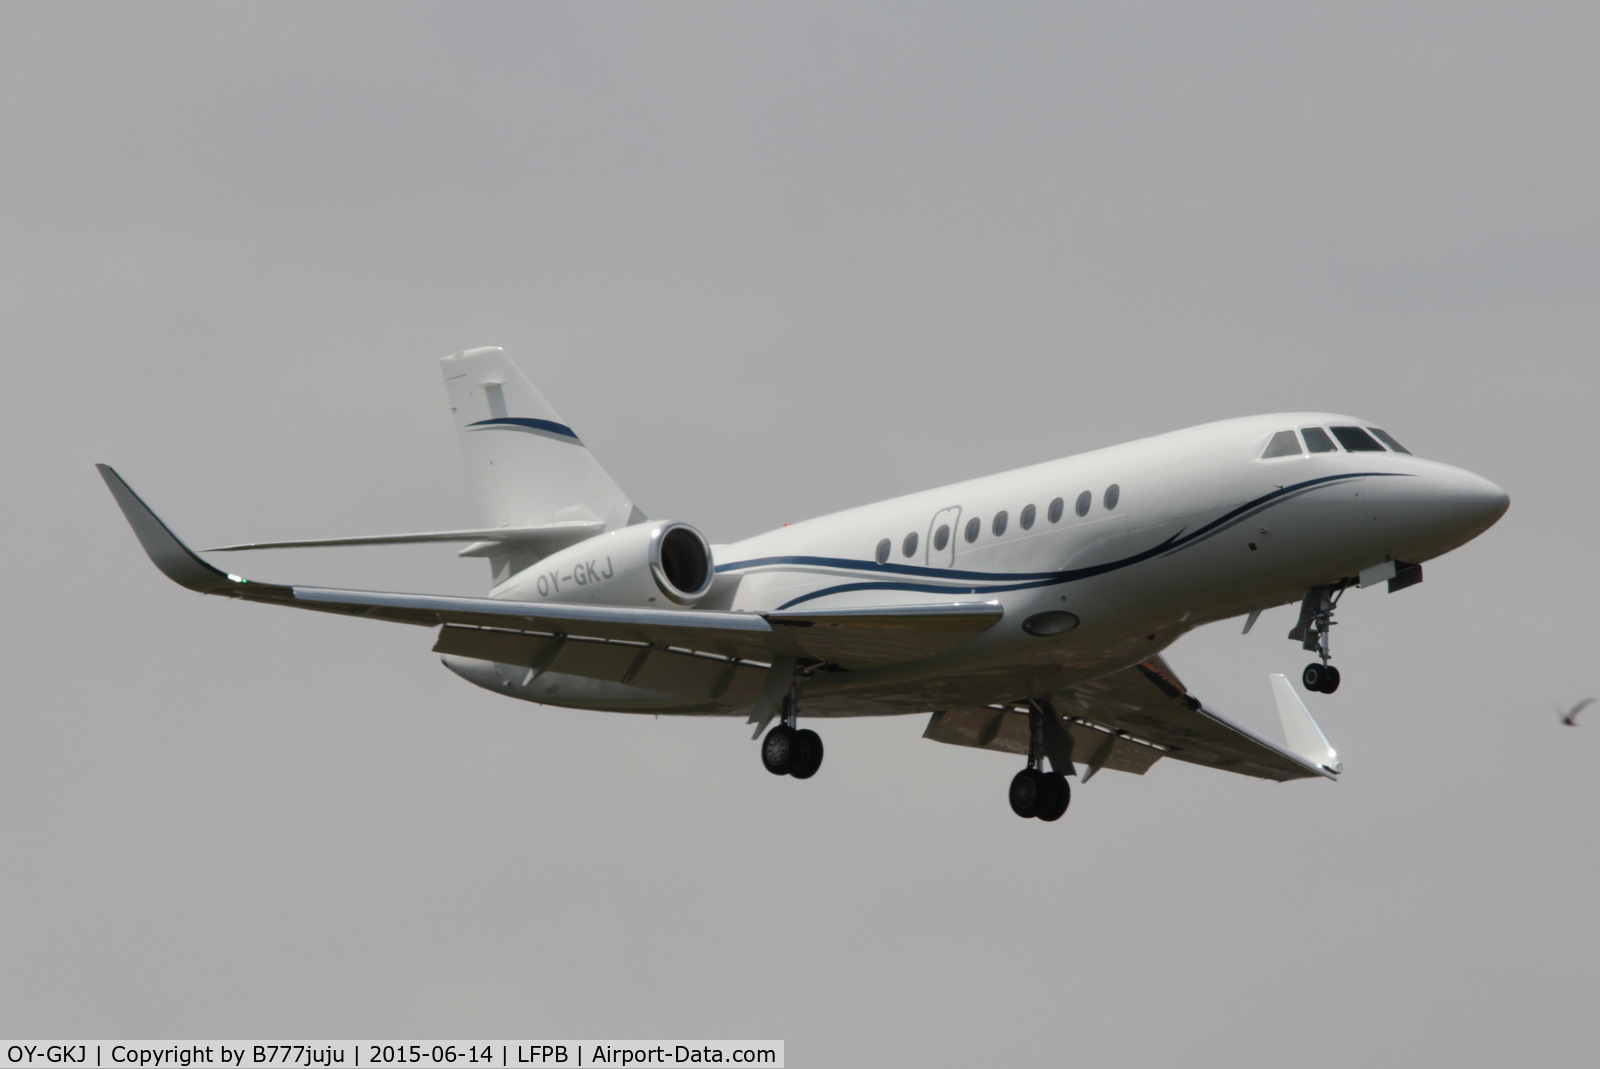 OY-GKJ, 2009 Dassault Falcon 2000LX C/N 195, at Le Bourget with new peint